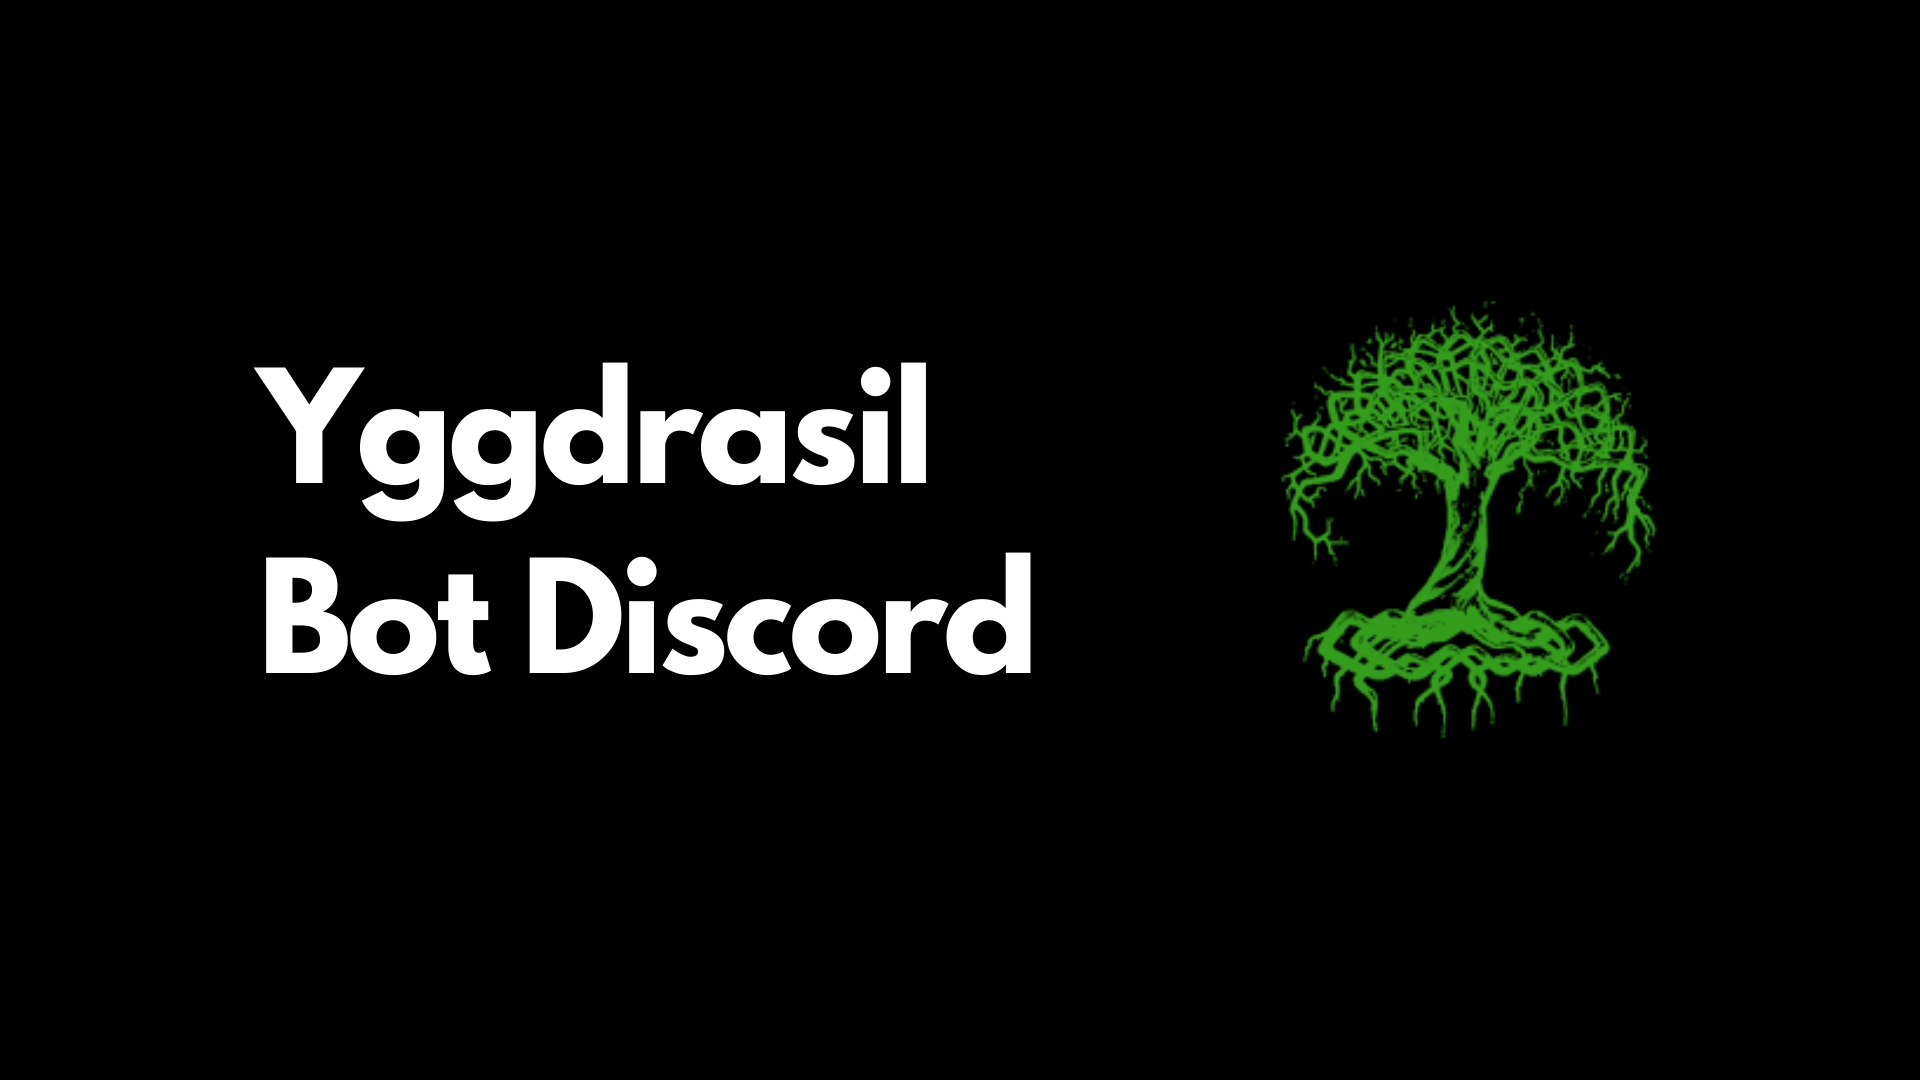 How to use Yggdrasil Bot Discord